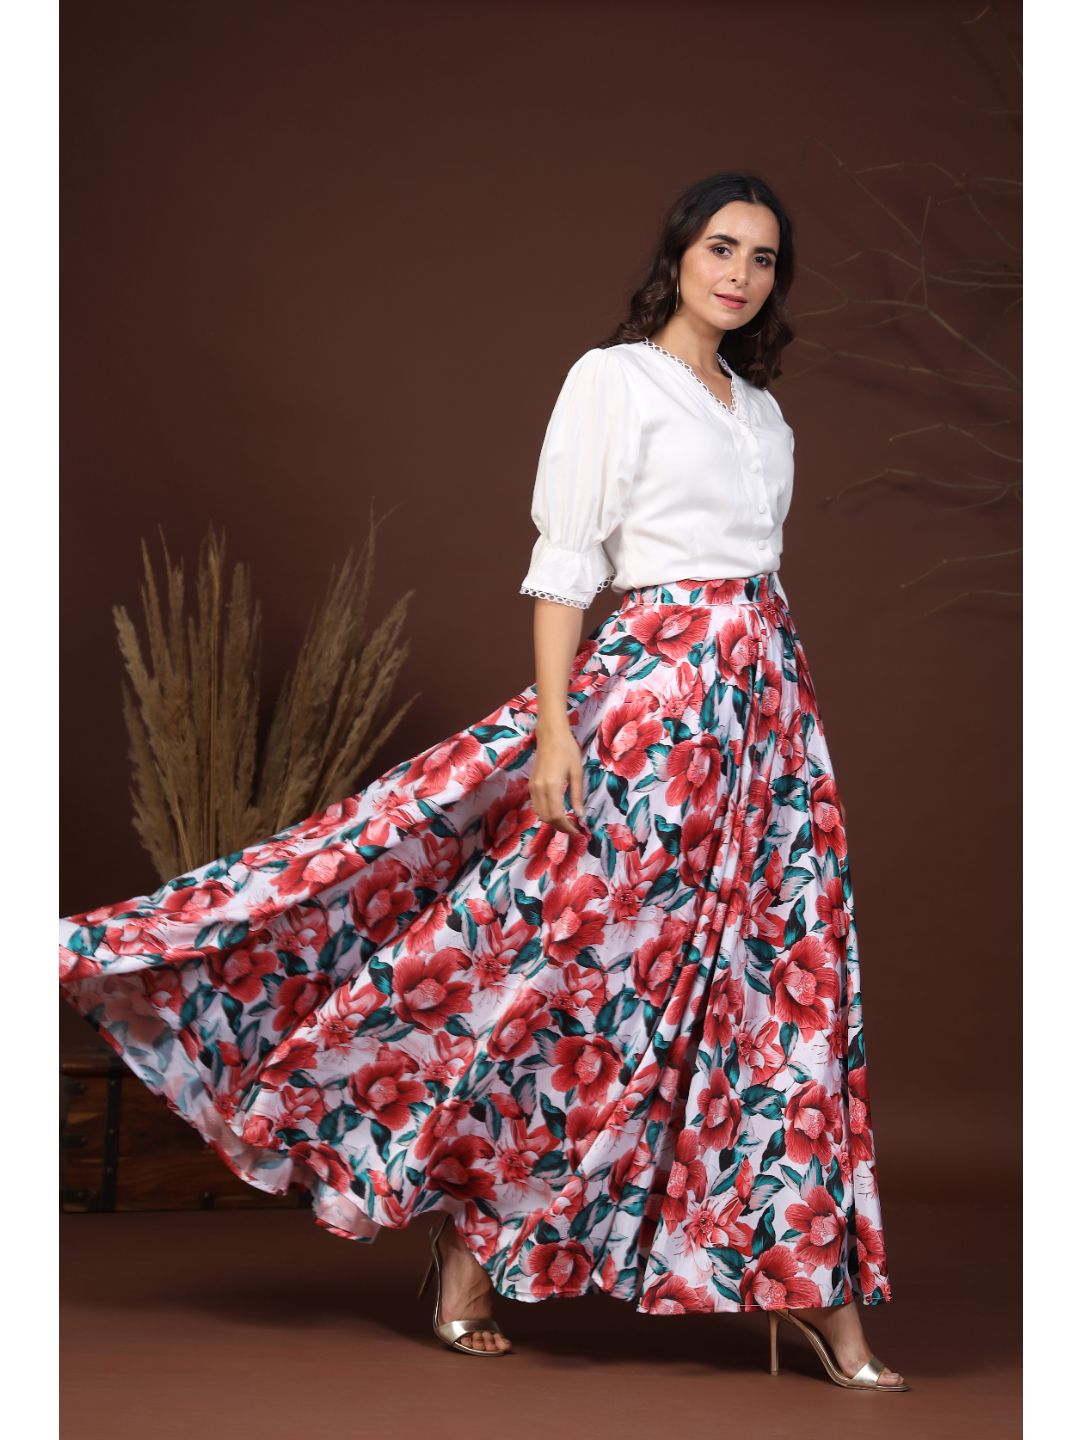 White-Shirt-With-Floral-Skirt